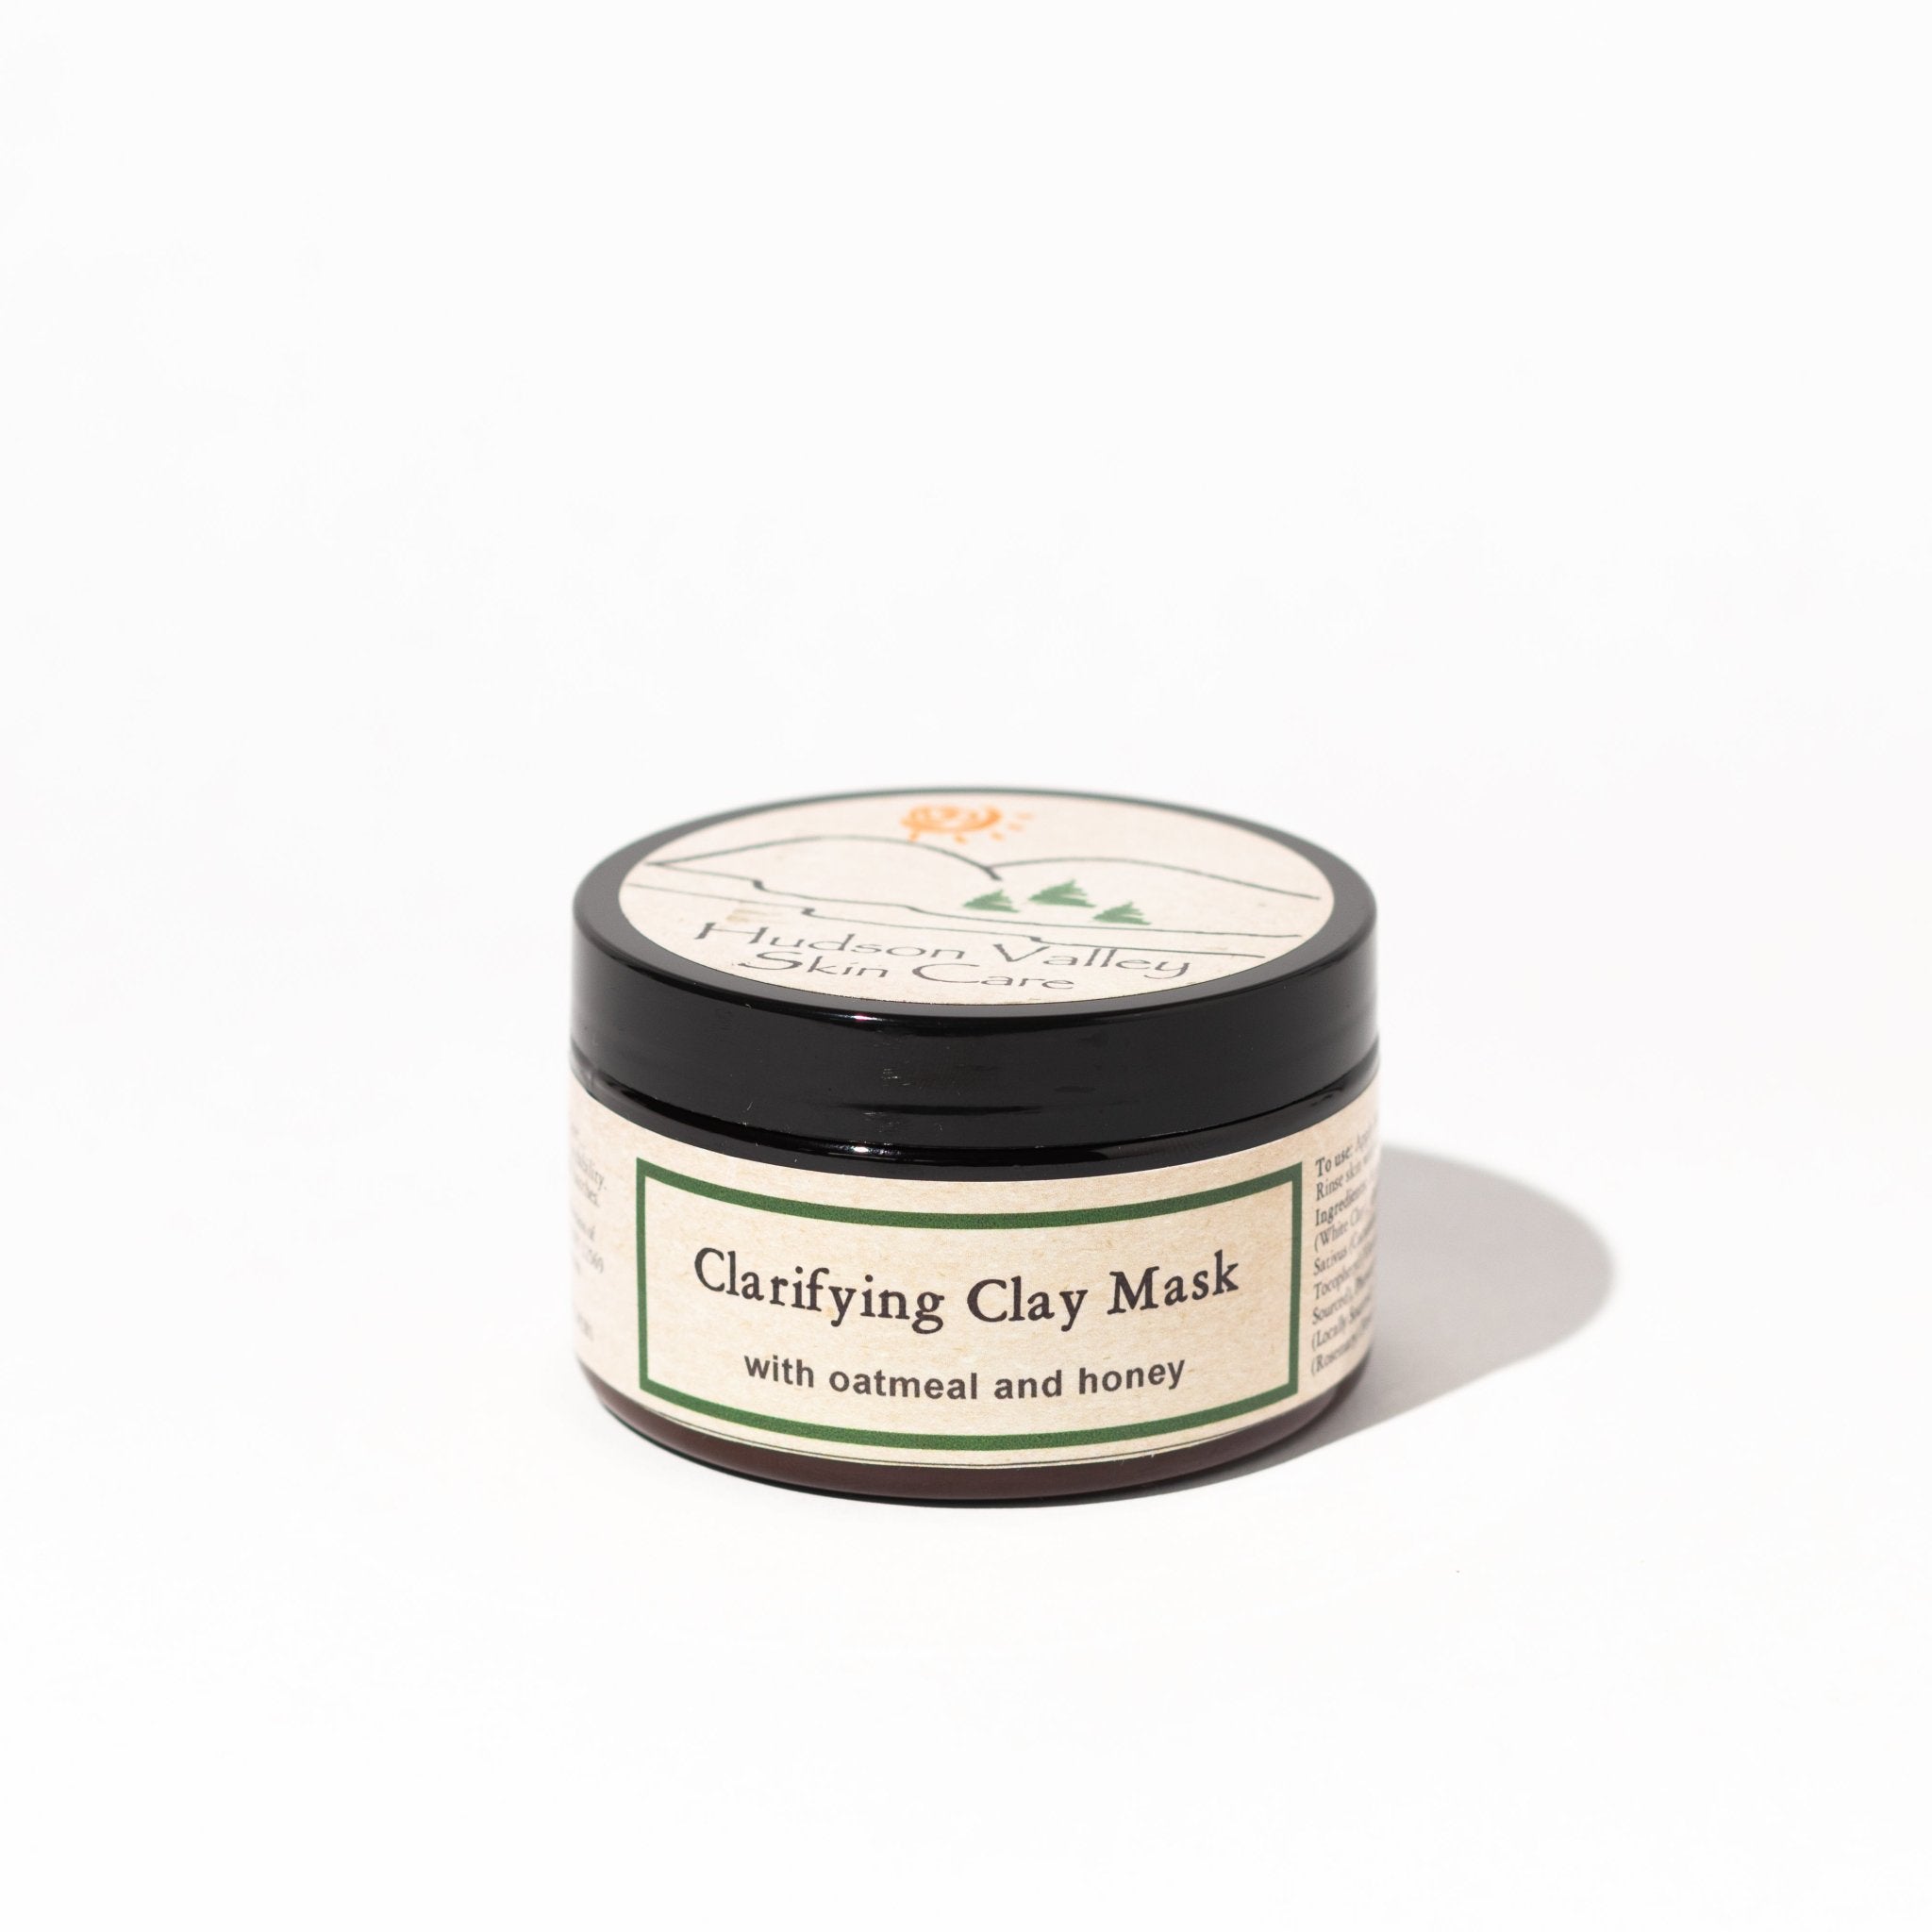 Clarifying Clay Mask - Hudson Valley Skin Care